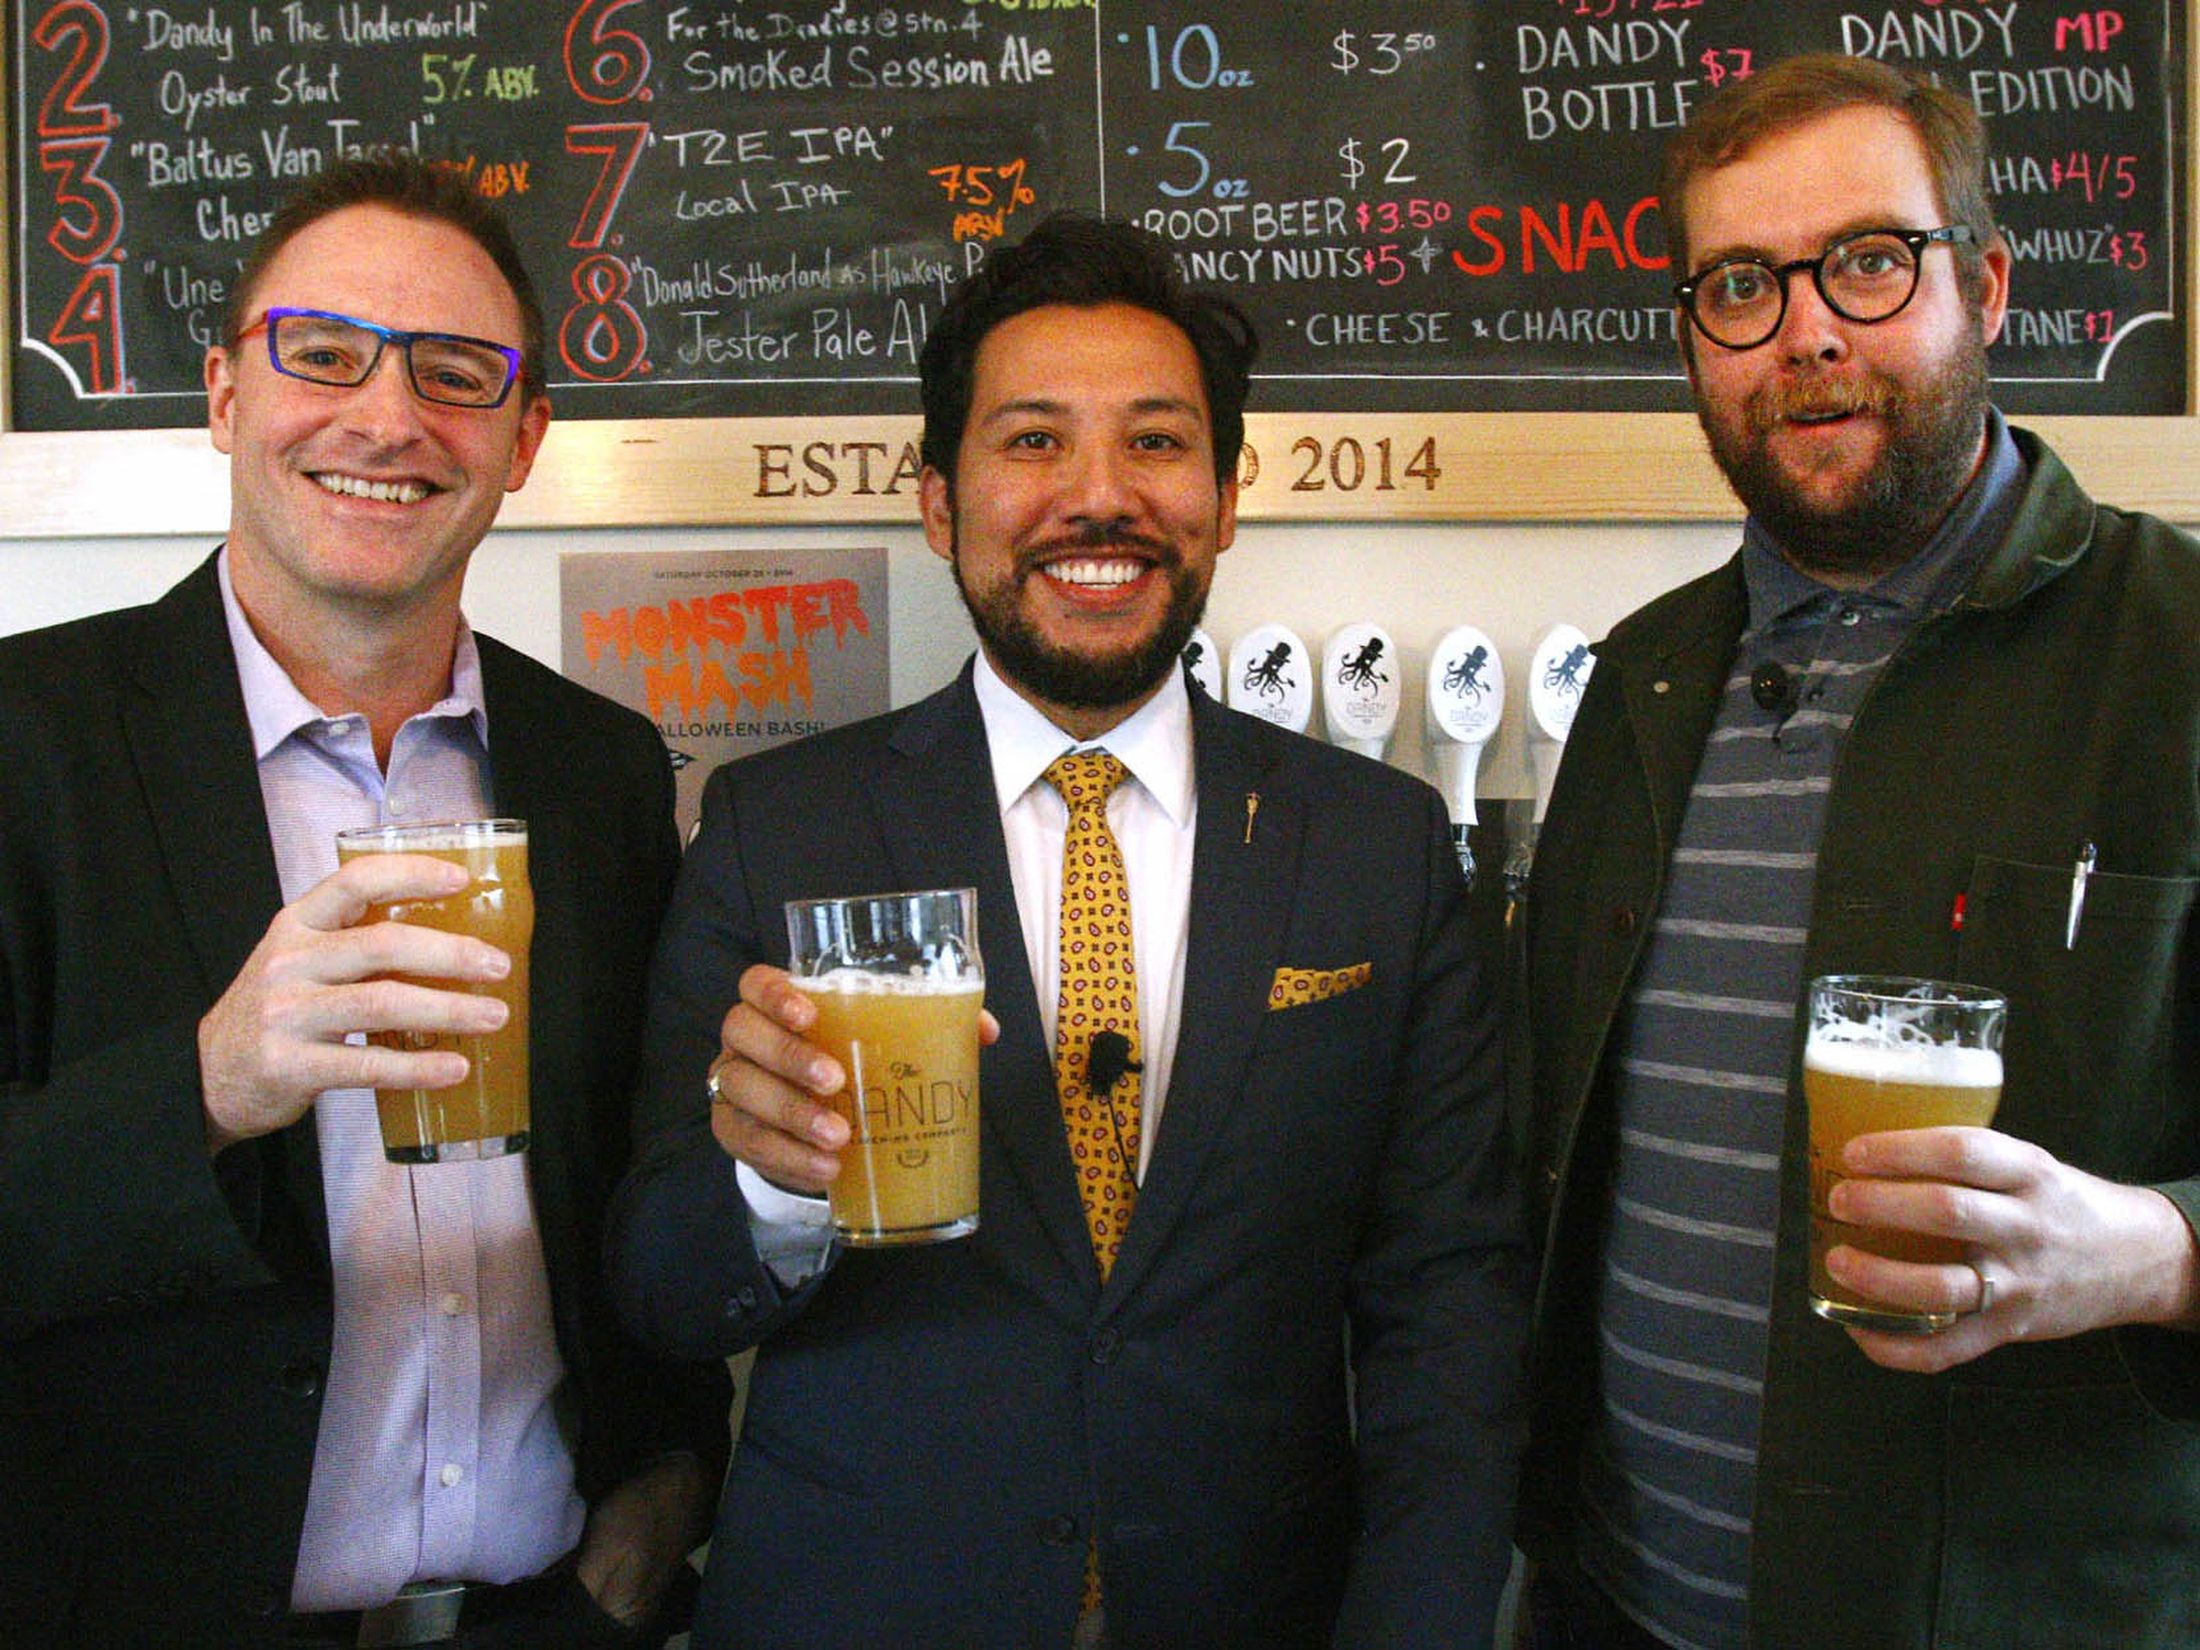 New funding on tap for craft brewers